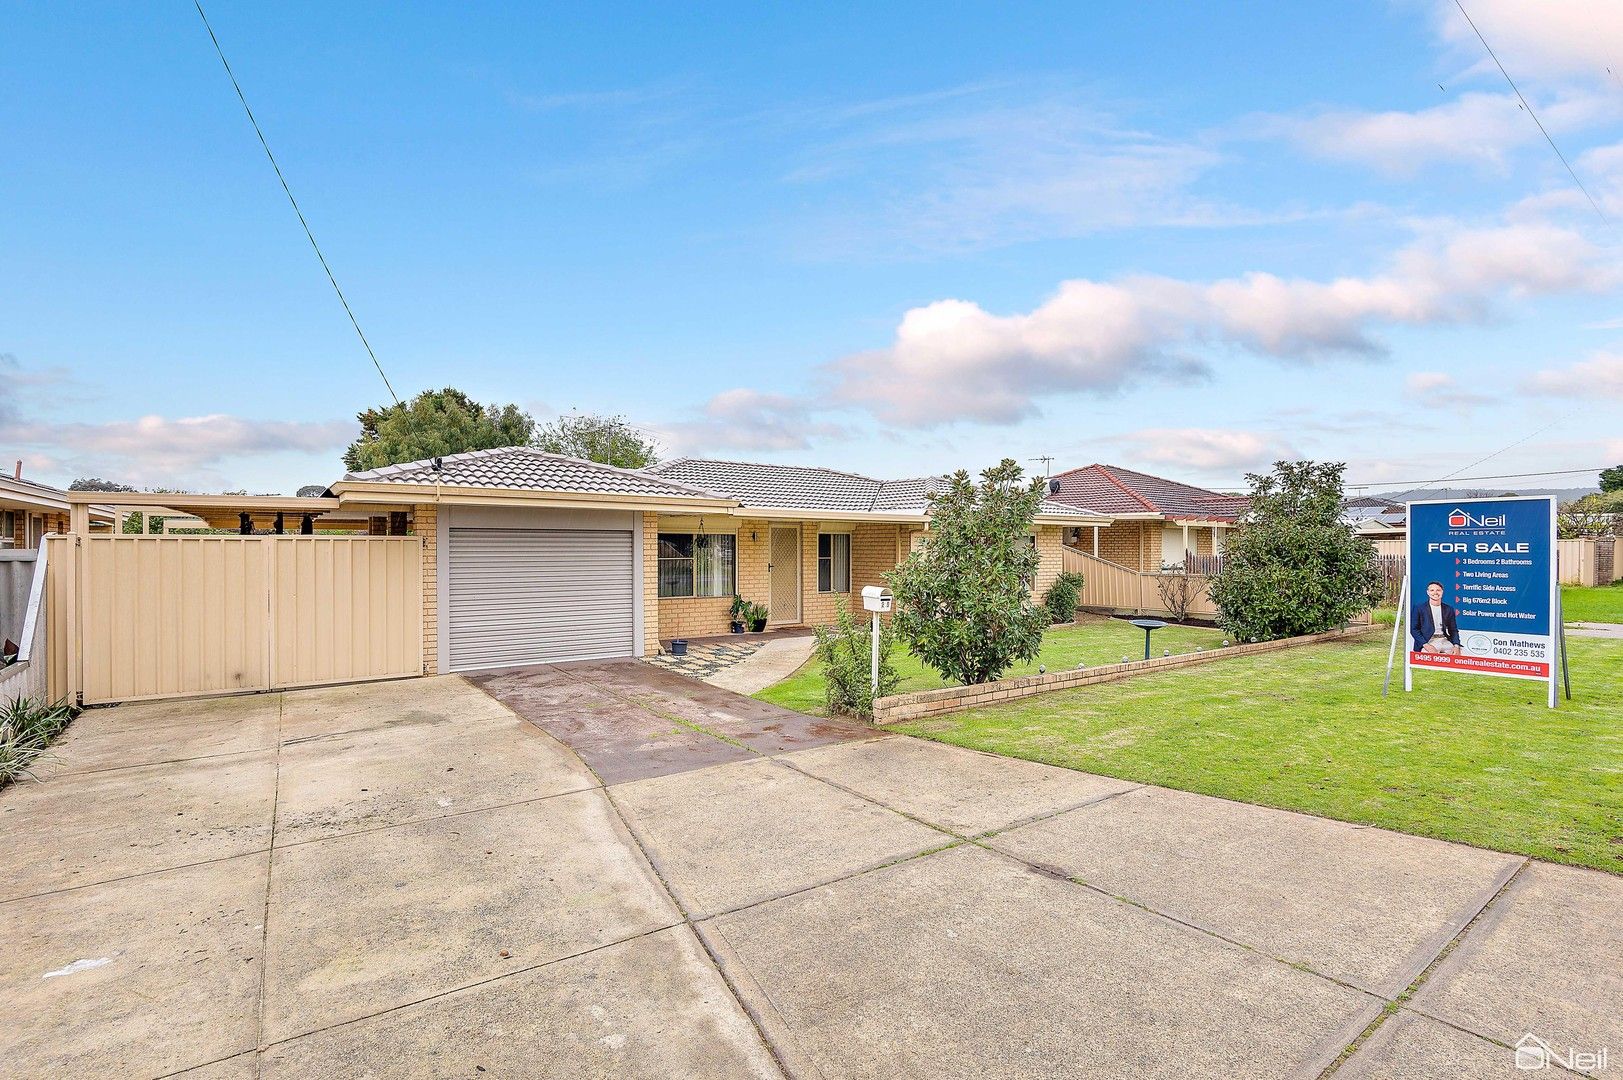 3 bedrooms House in 29 Challis Road ARMADALE WA, 6112